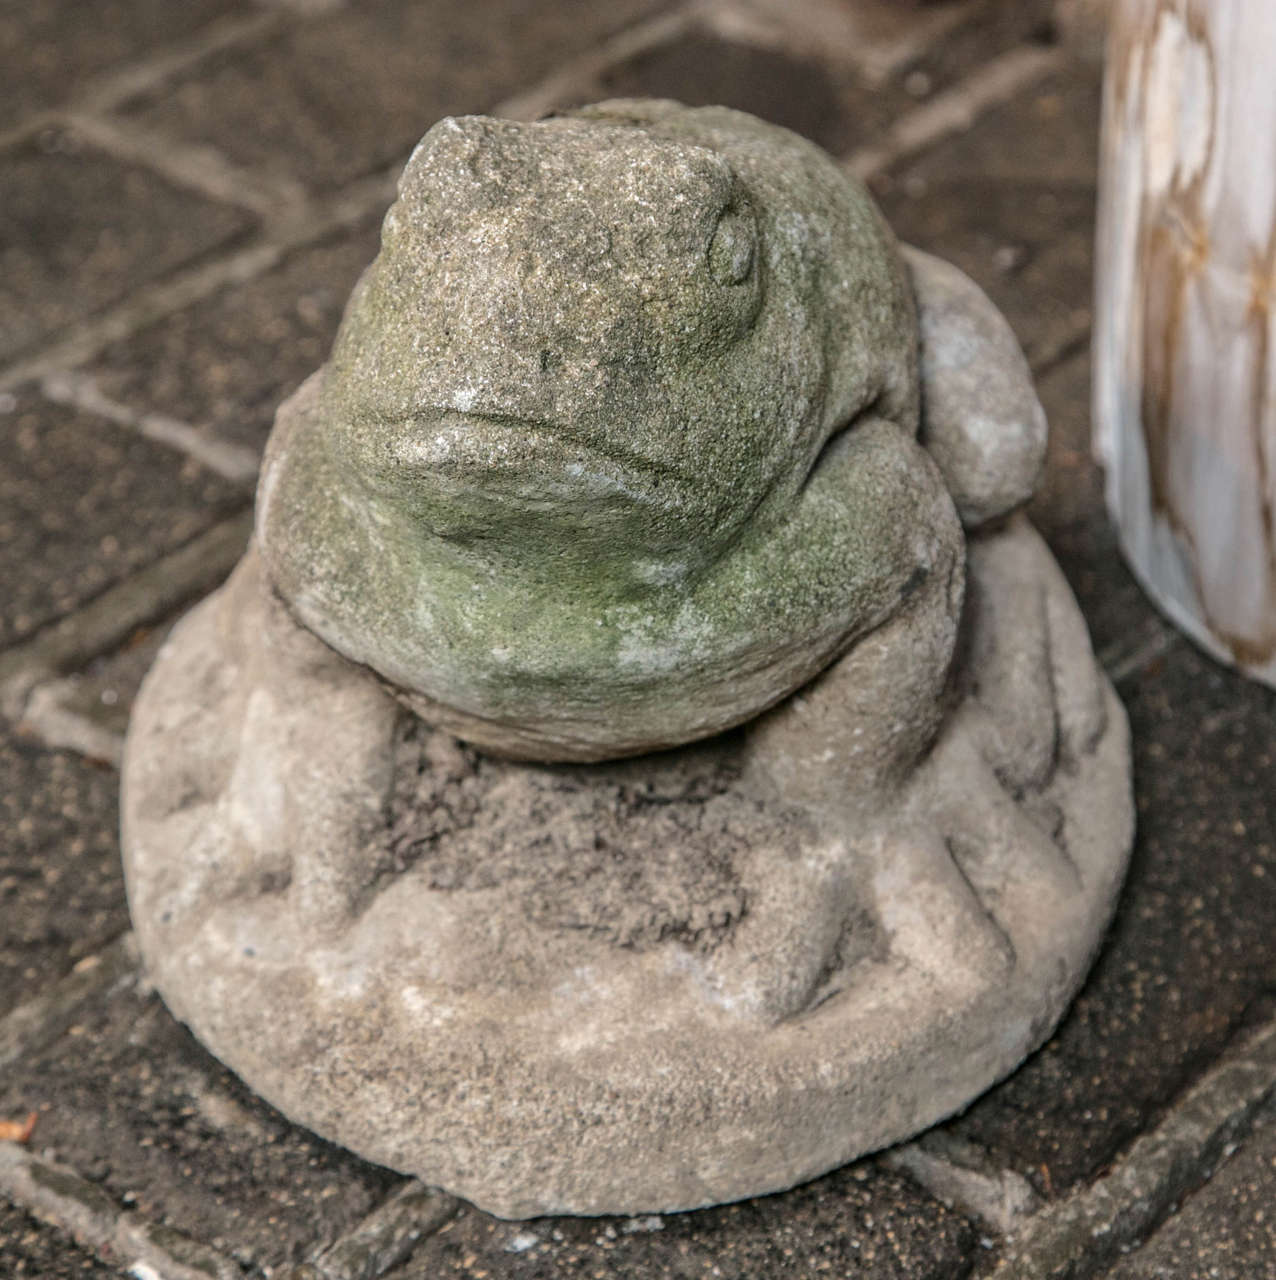 Cast stone or cement frog garden ornament from the 1940s-1950s.